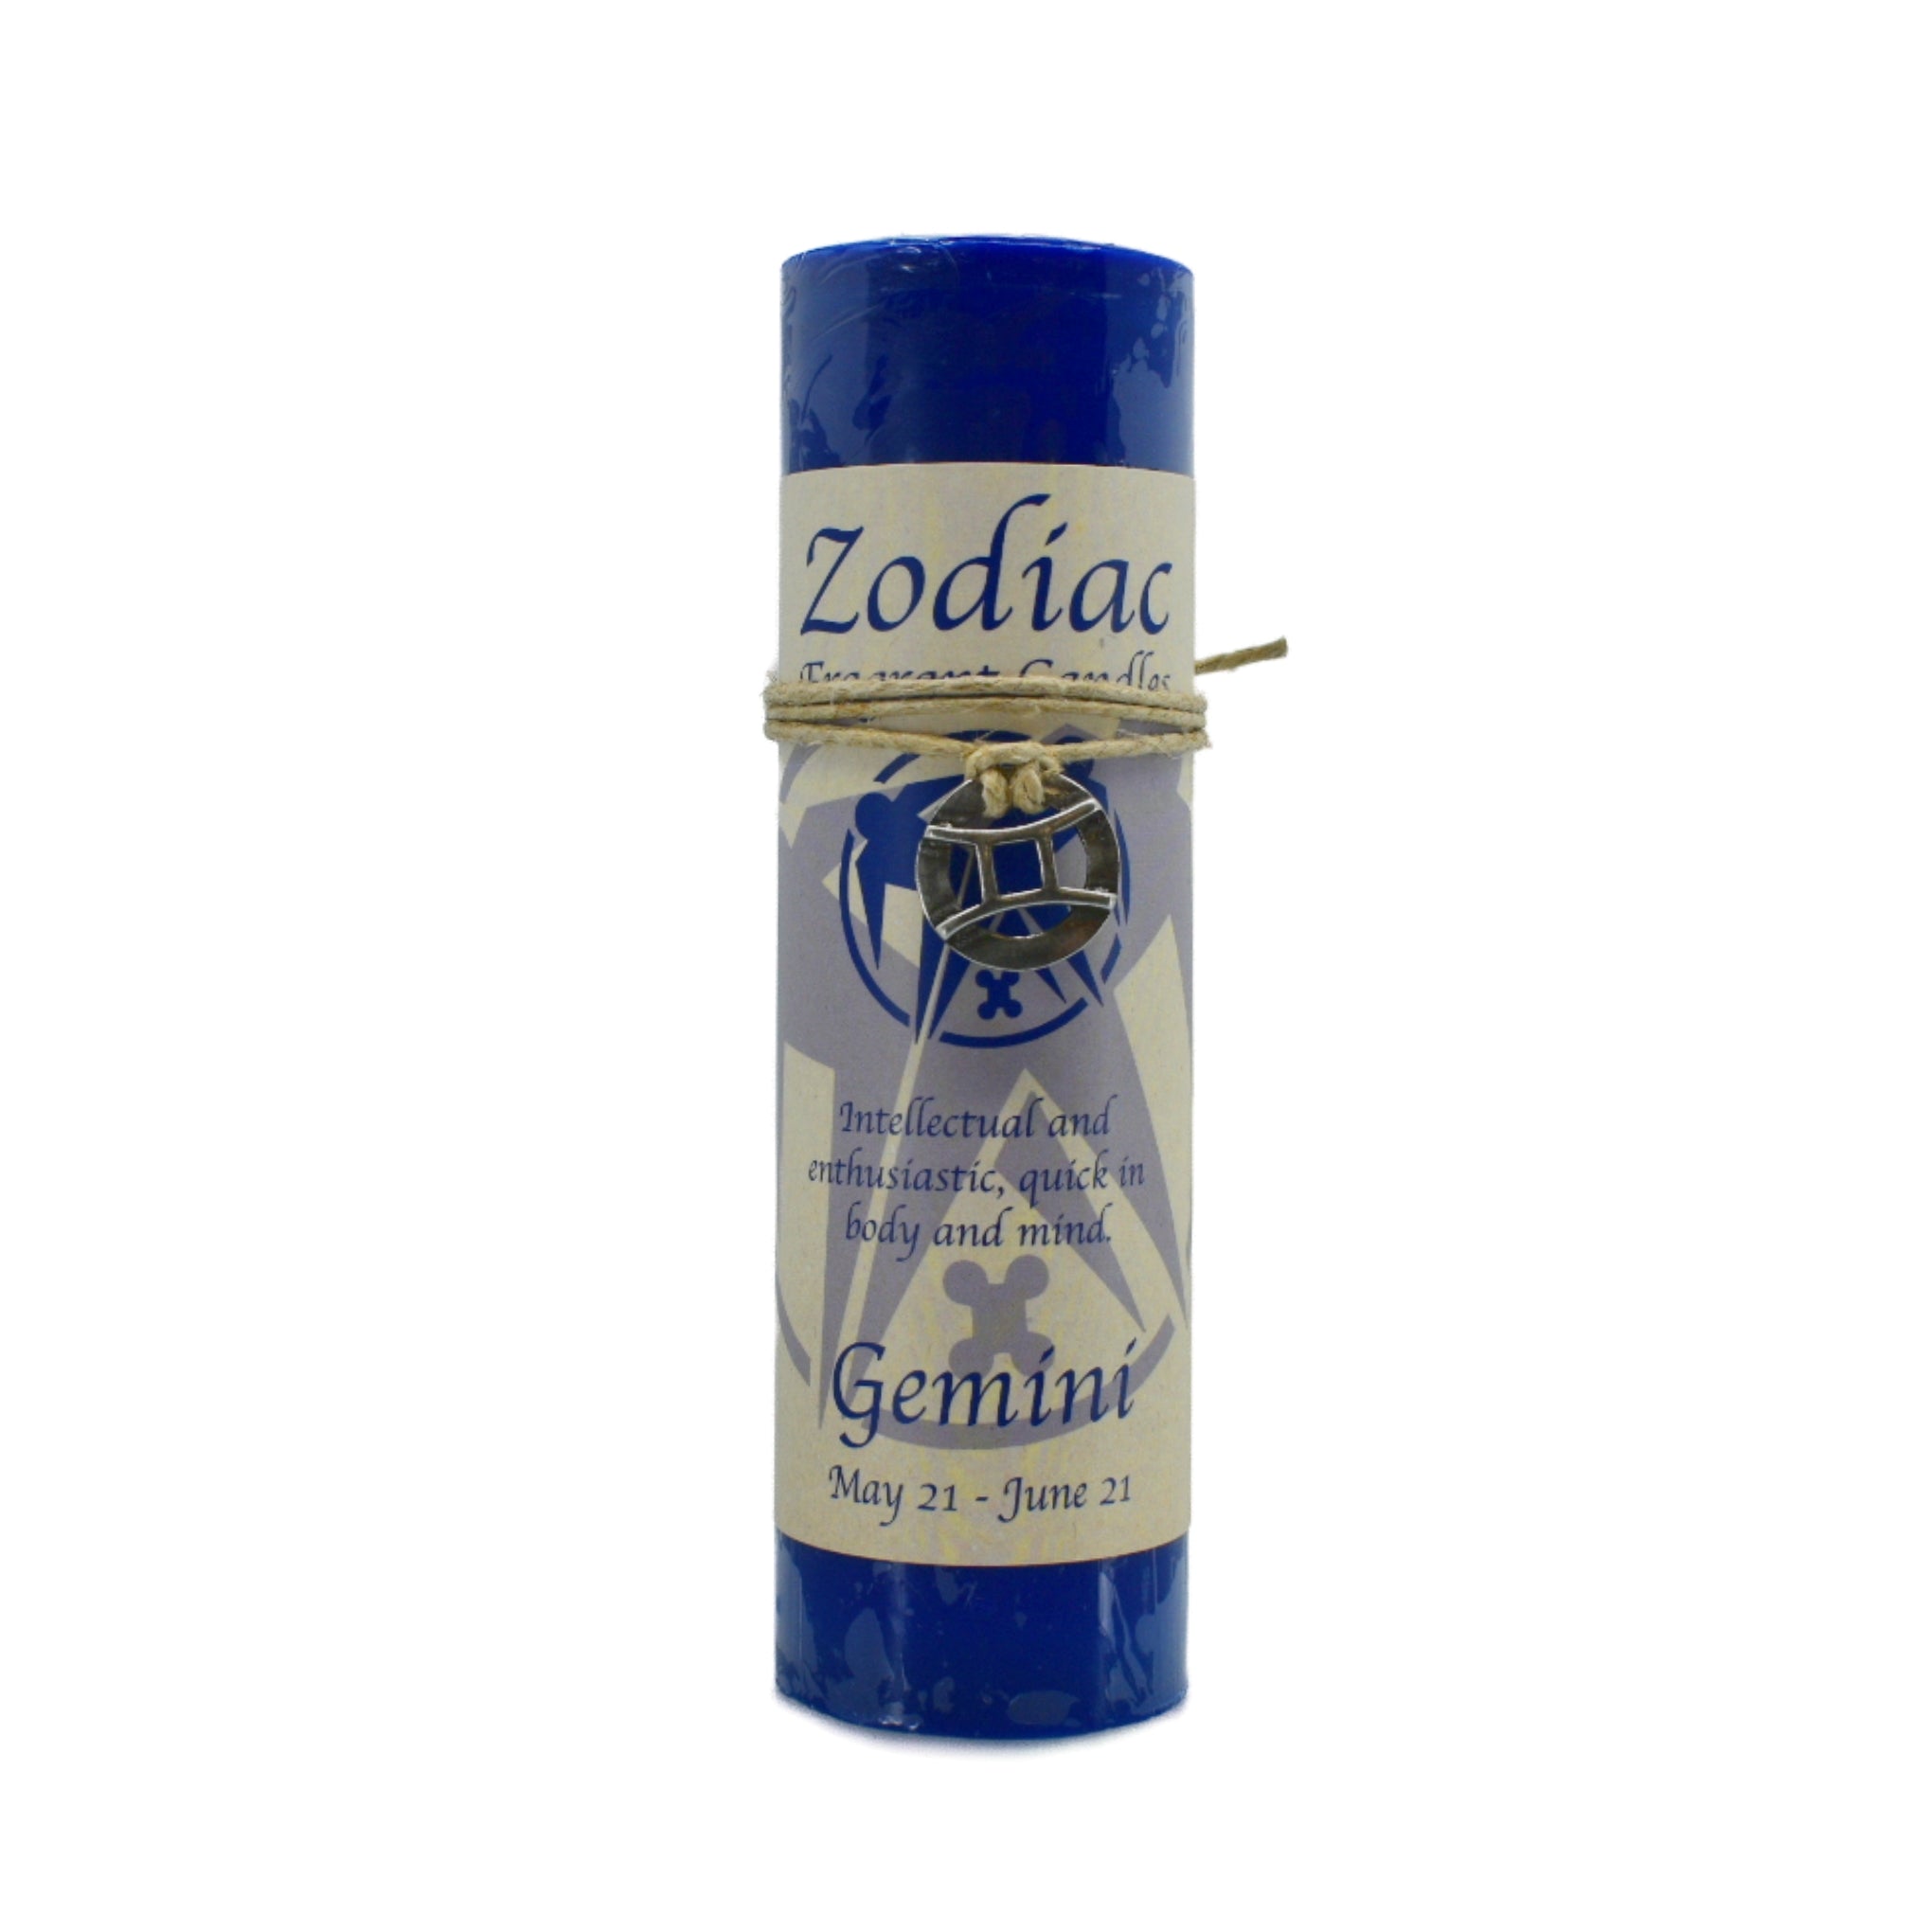 Gemini Zodiac Candle.  Candle is dark blue.  It has a pewter pendant attached that can be worn or used as an amulet.  Enthusiastic, intellectual, quick in body and mind.